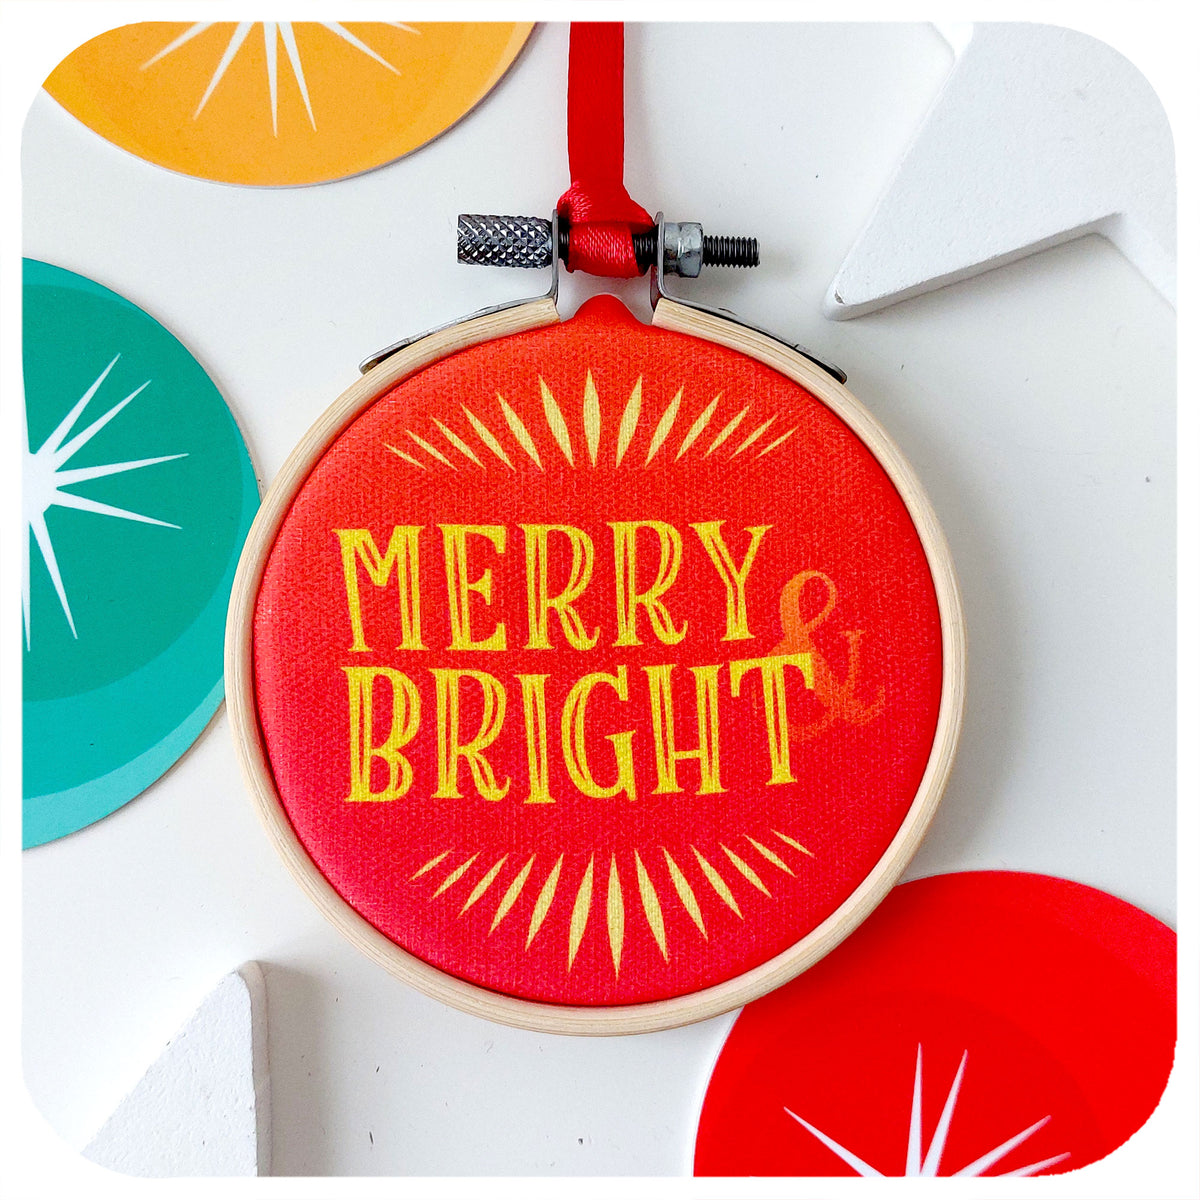 A printed fabric retro style Christmas tree decoration on a white background surrounded by colourful Christmas decorations. Text on bauble reads: Merry & Bright